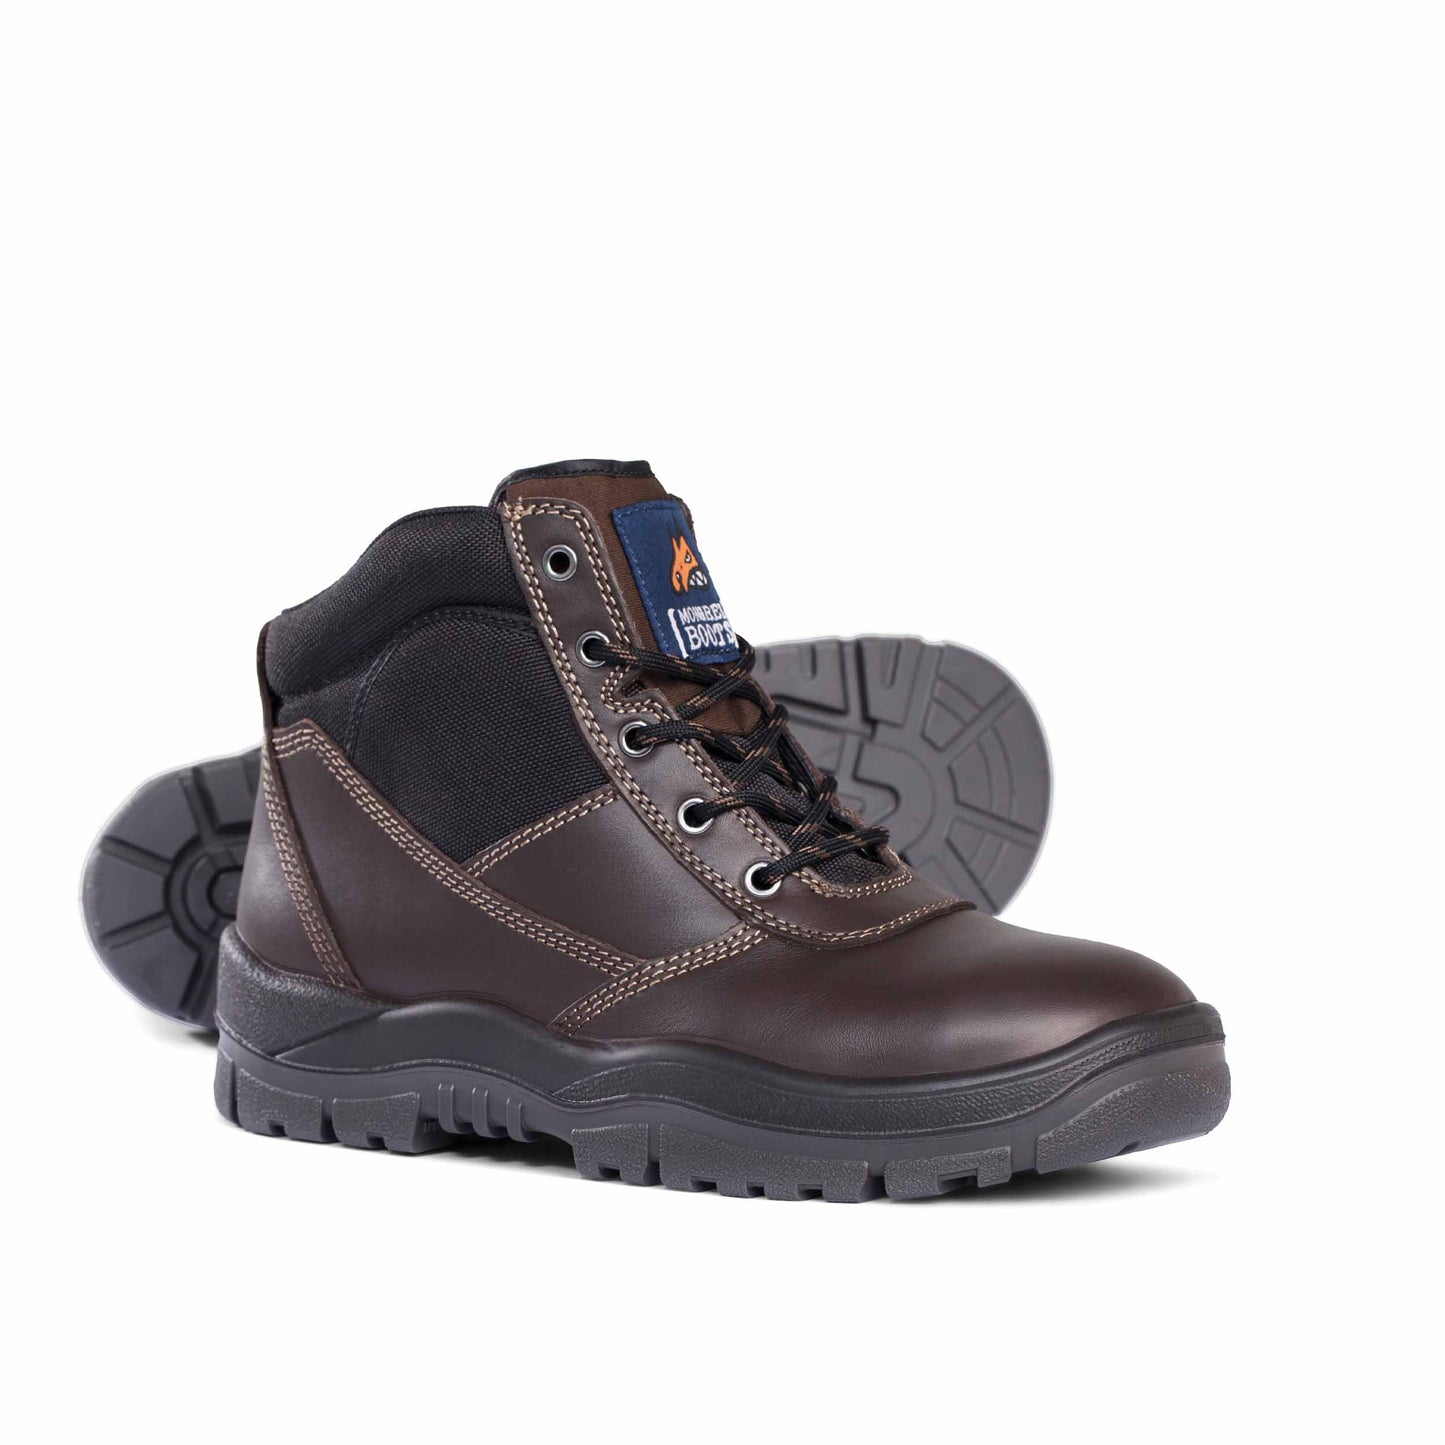 MONGREL 917030 WORK BOOTS - LACE UP